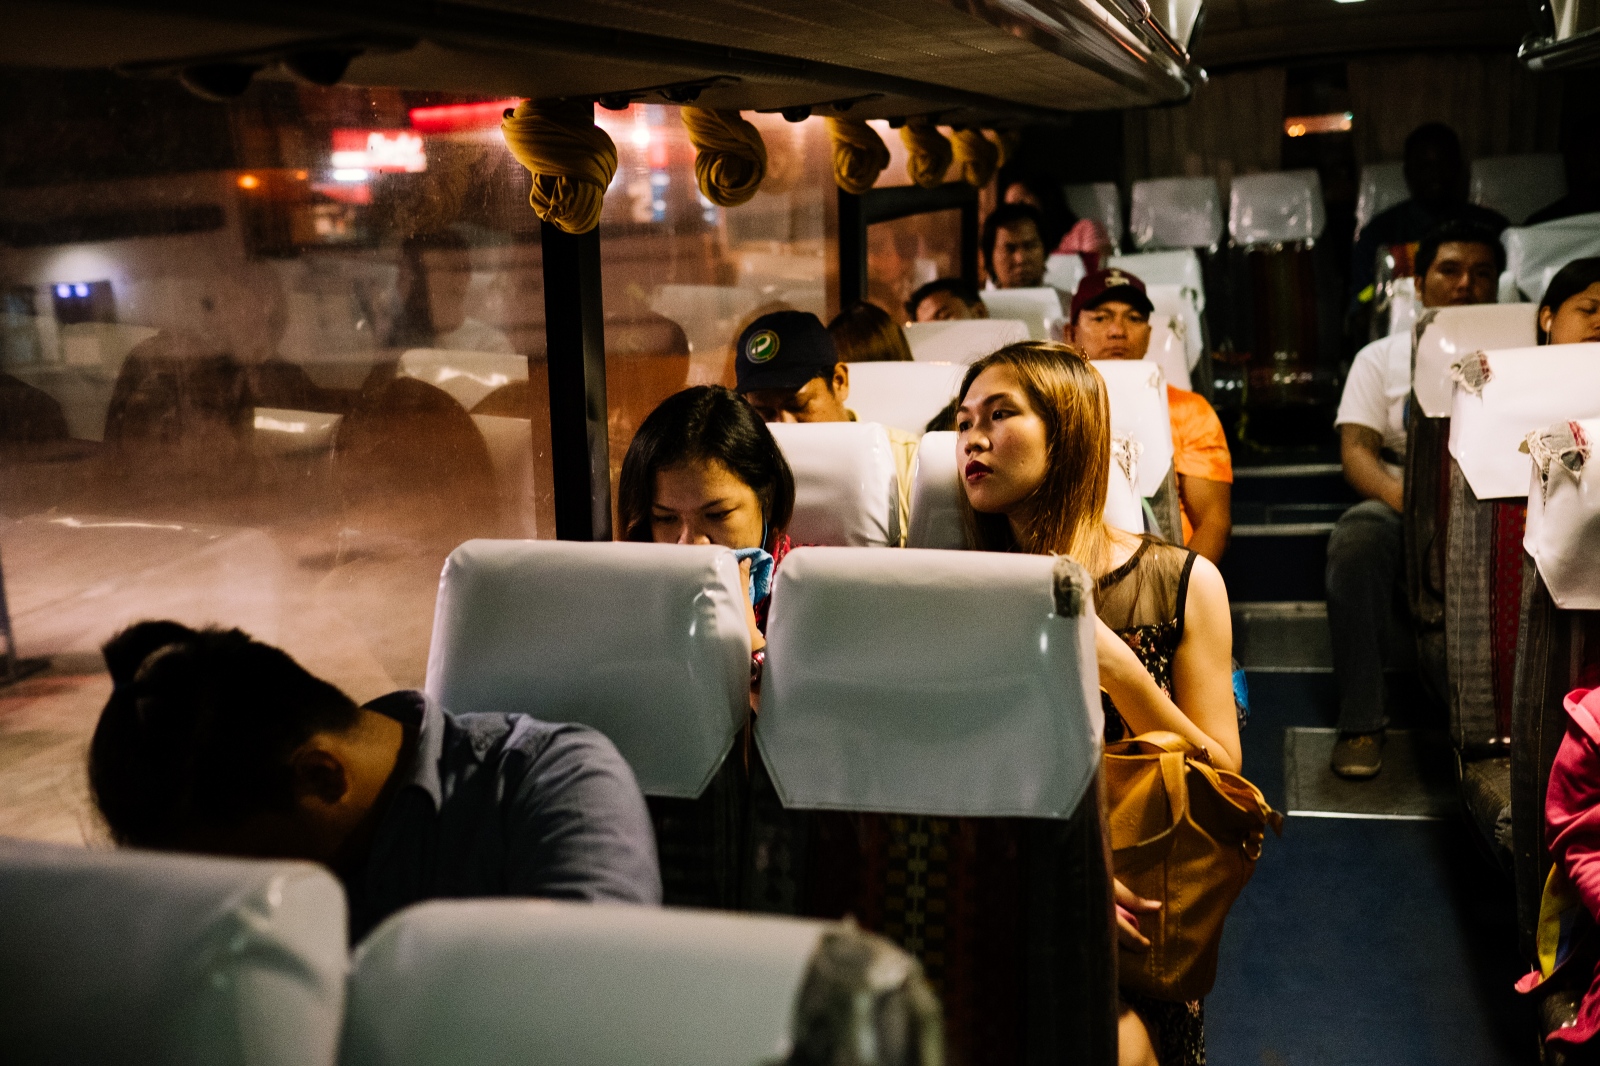 Bessie, (Rachel), 32 years old, on her way to work. &ldquo;One &nbsp;of the reasons why I like to work at night is the fact I face less traffic on my commute. During the day the buses are so crowed that you can barely find a seat.&rdquo; Manila, Philippines. 25th April 2016.